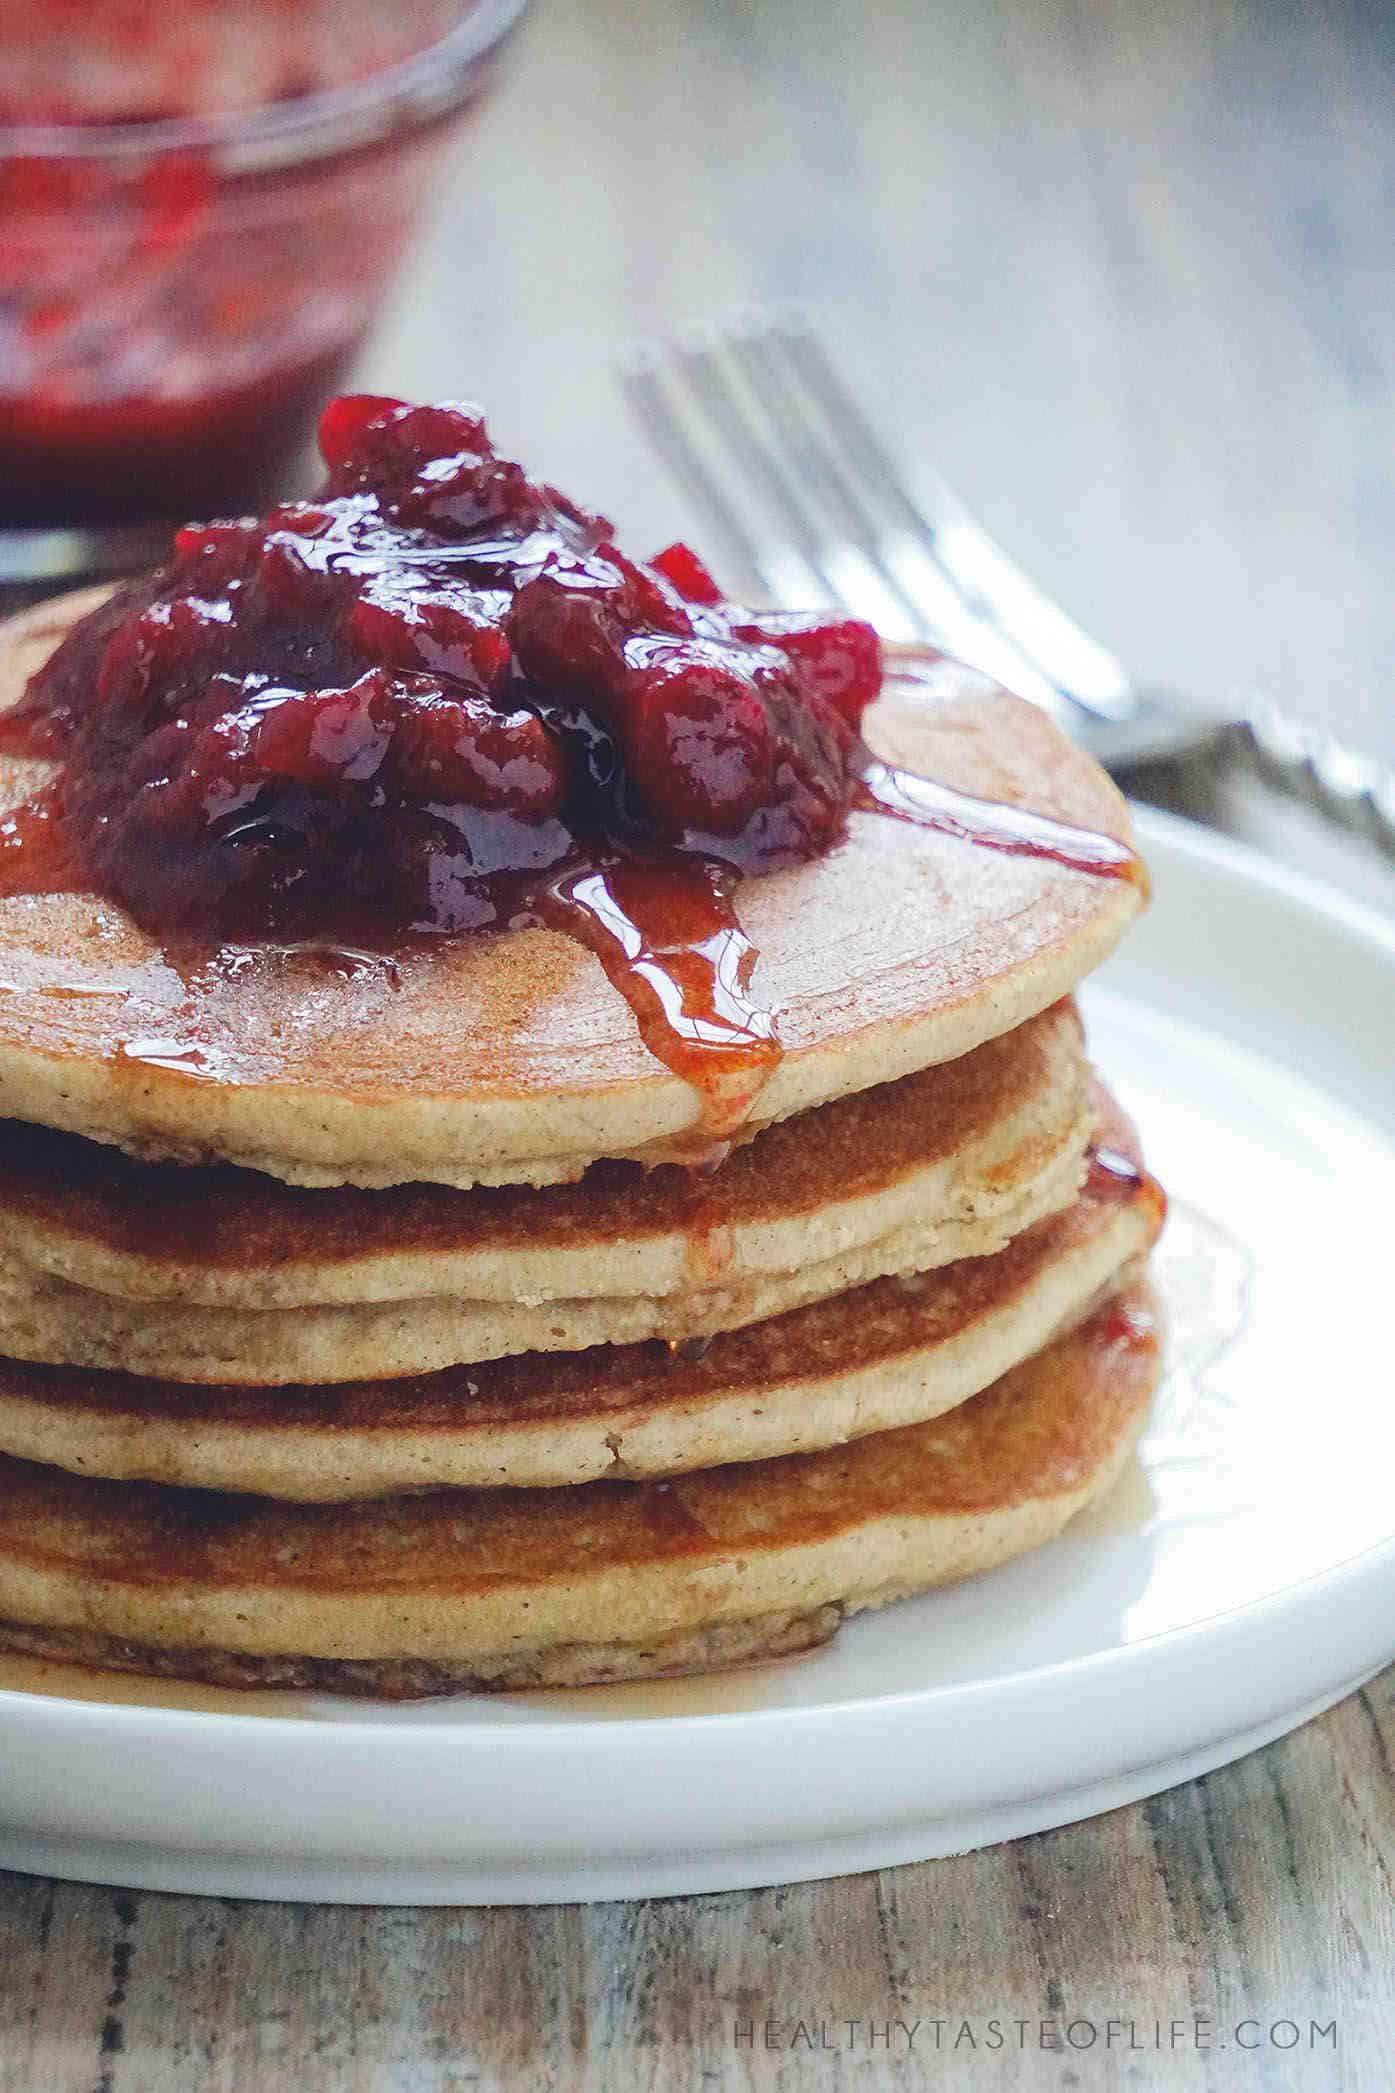 Gluten Free Sourdough Pancake recipe - Light and fluffy dairy free pancakes made with sorghum flour and gluten free sourdough starter.